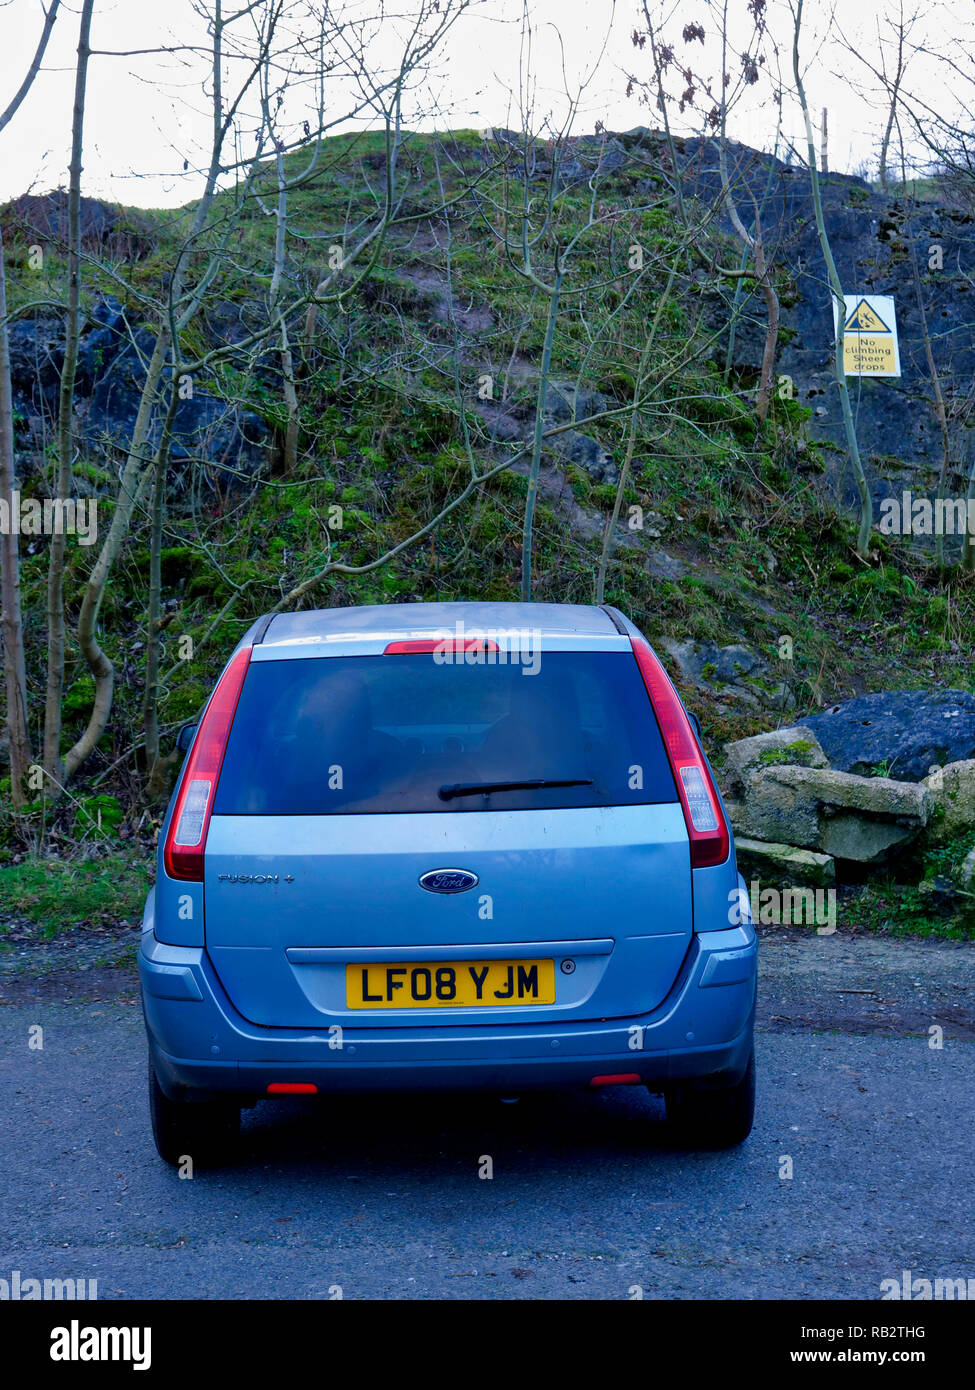 Derbyshire, UK. 06th Jan, 2019. An abandoned light blue Ford Fusion + car parked at Stoney Wood entrance, Wirksworth, Derbyshire, since the New Year has been reported to the Police as possible missing persons or abandoned vehicle, it's near the potentially dangerous old Tarmac Middle Peak Quarry workings Credit: Doug Blane/Alamy Live News Stock Photo